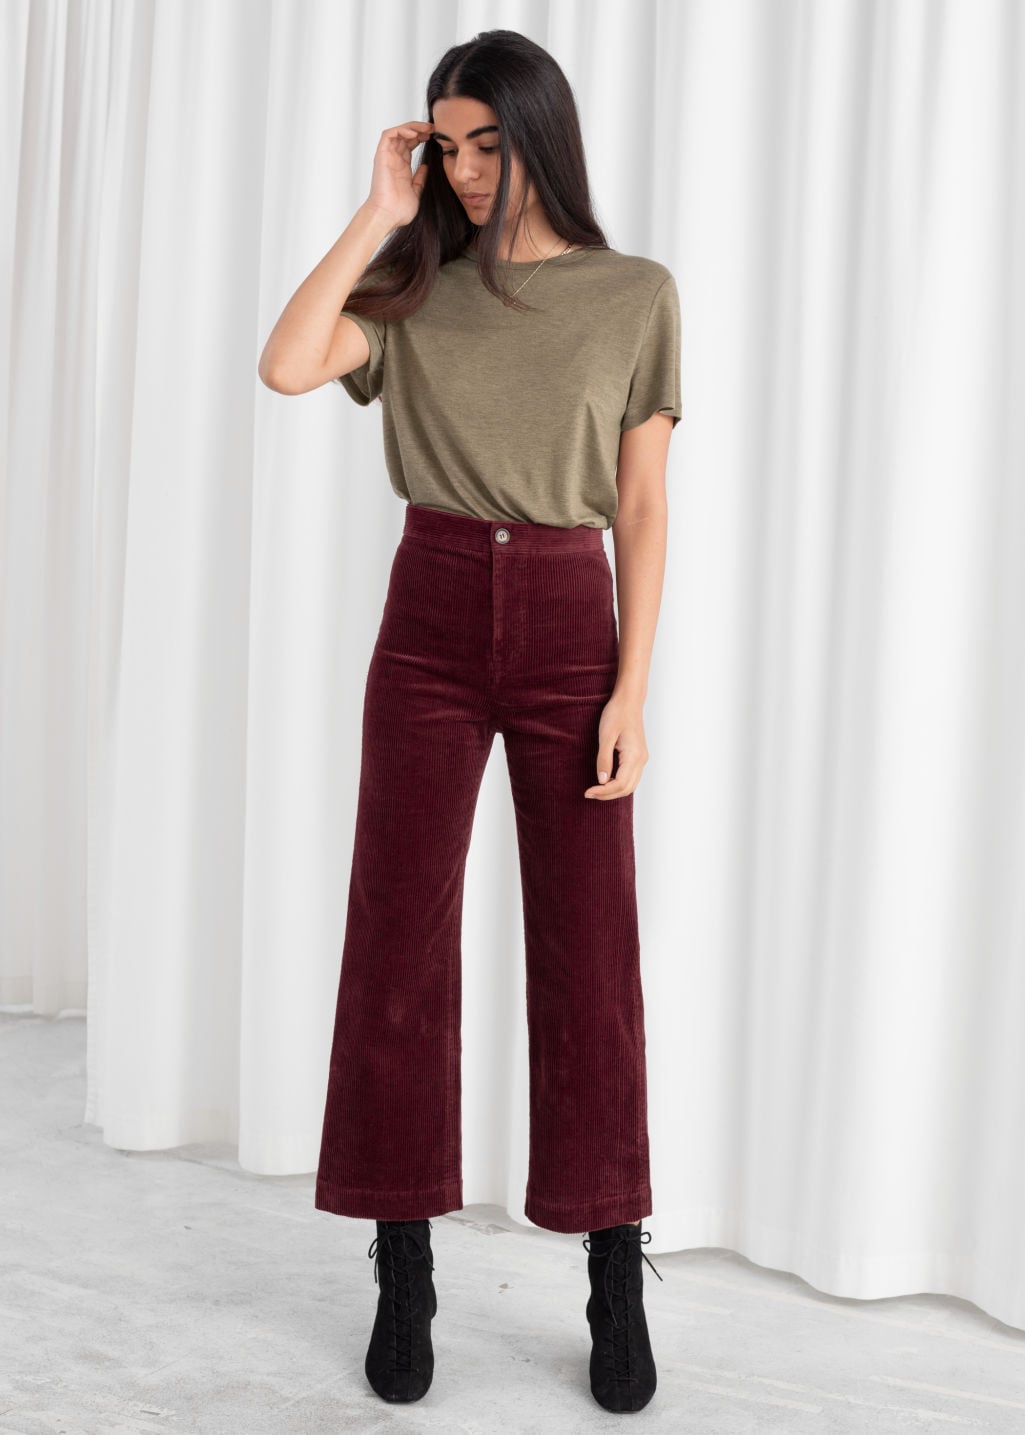 & Stories Relaxed Corduroy Trousers in Dark Red | 7 Fall Pants Trends More Enticing Than Your Best Pair of Jeans | POPSUGAR Fashion Photo 37